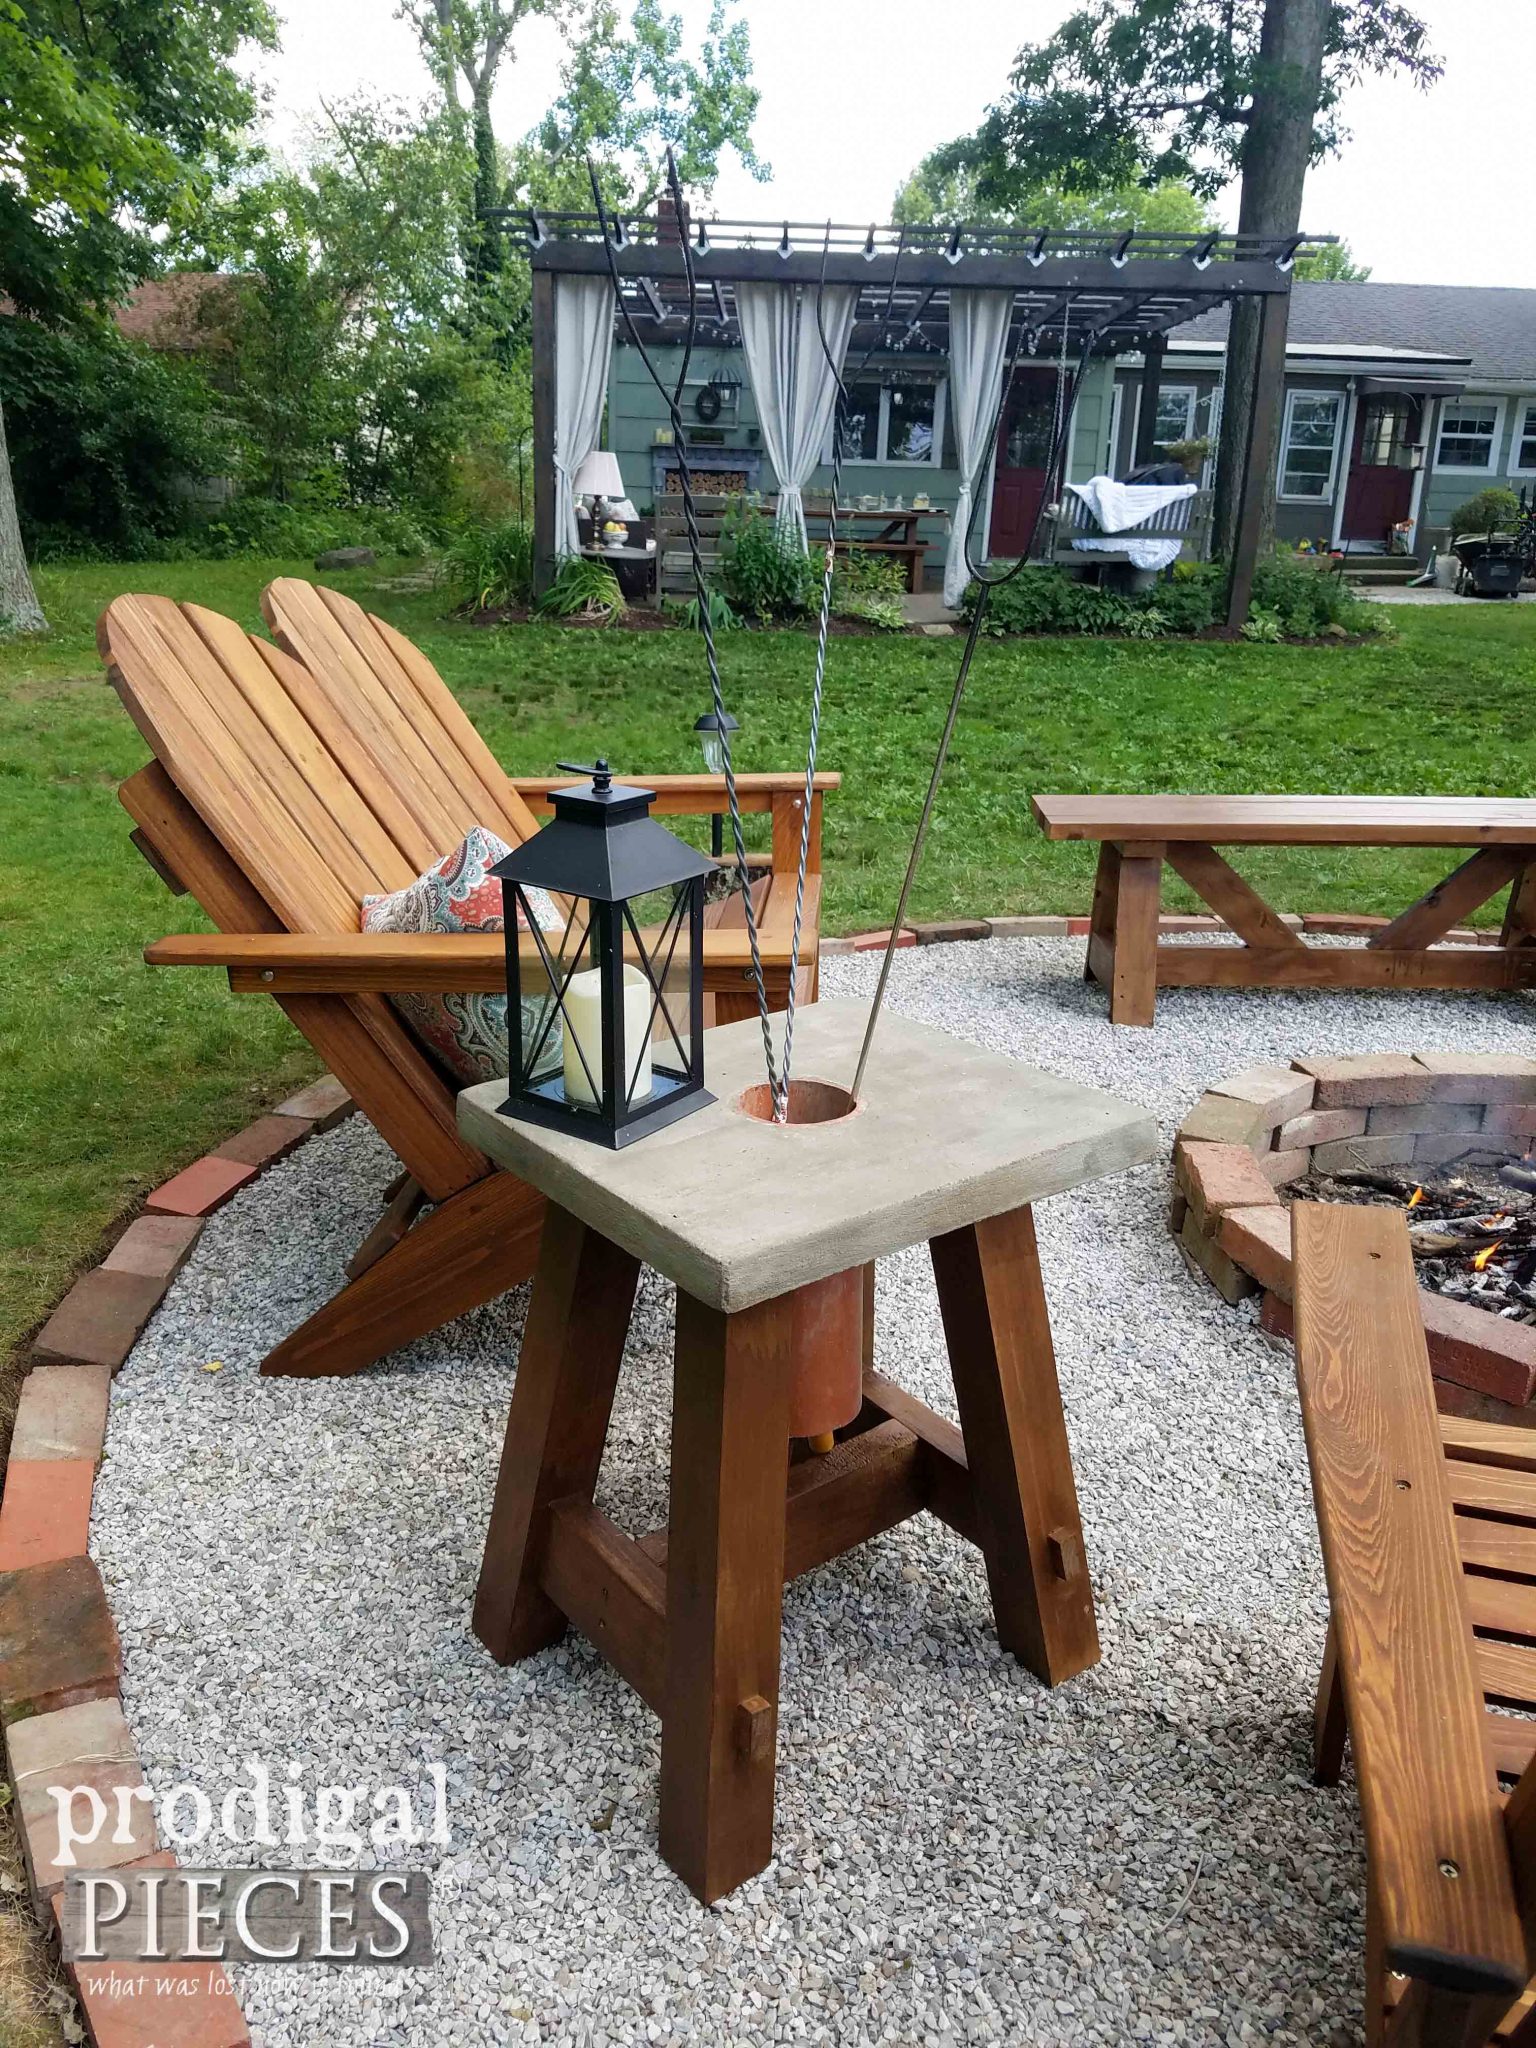 Concrete Fire Pit Table with Roasting Stick Holder by Prodigal Pieces | prodigalpieces.com